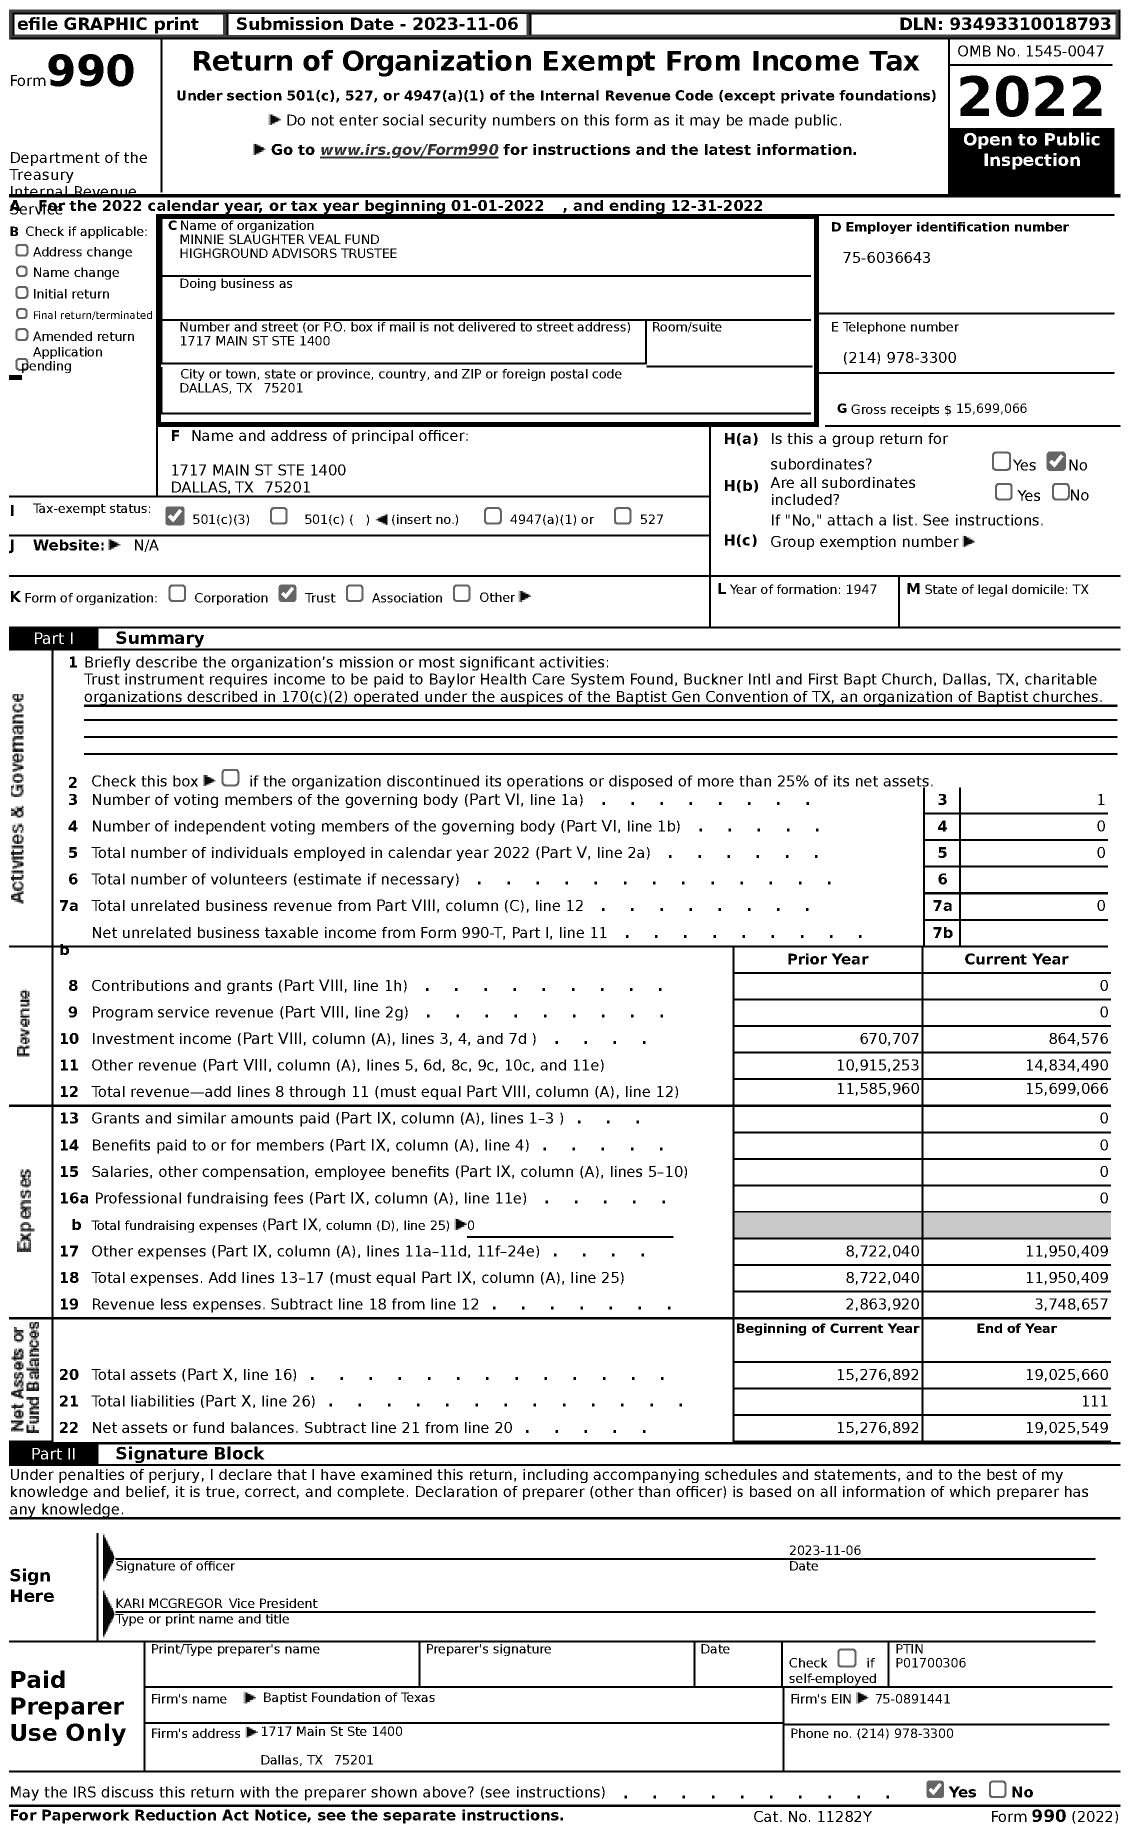 Image of first page of 2022 Form 990 for Minnie Slaughter Veal Fund Highground Advisors Trustee